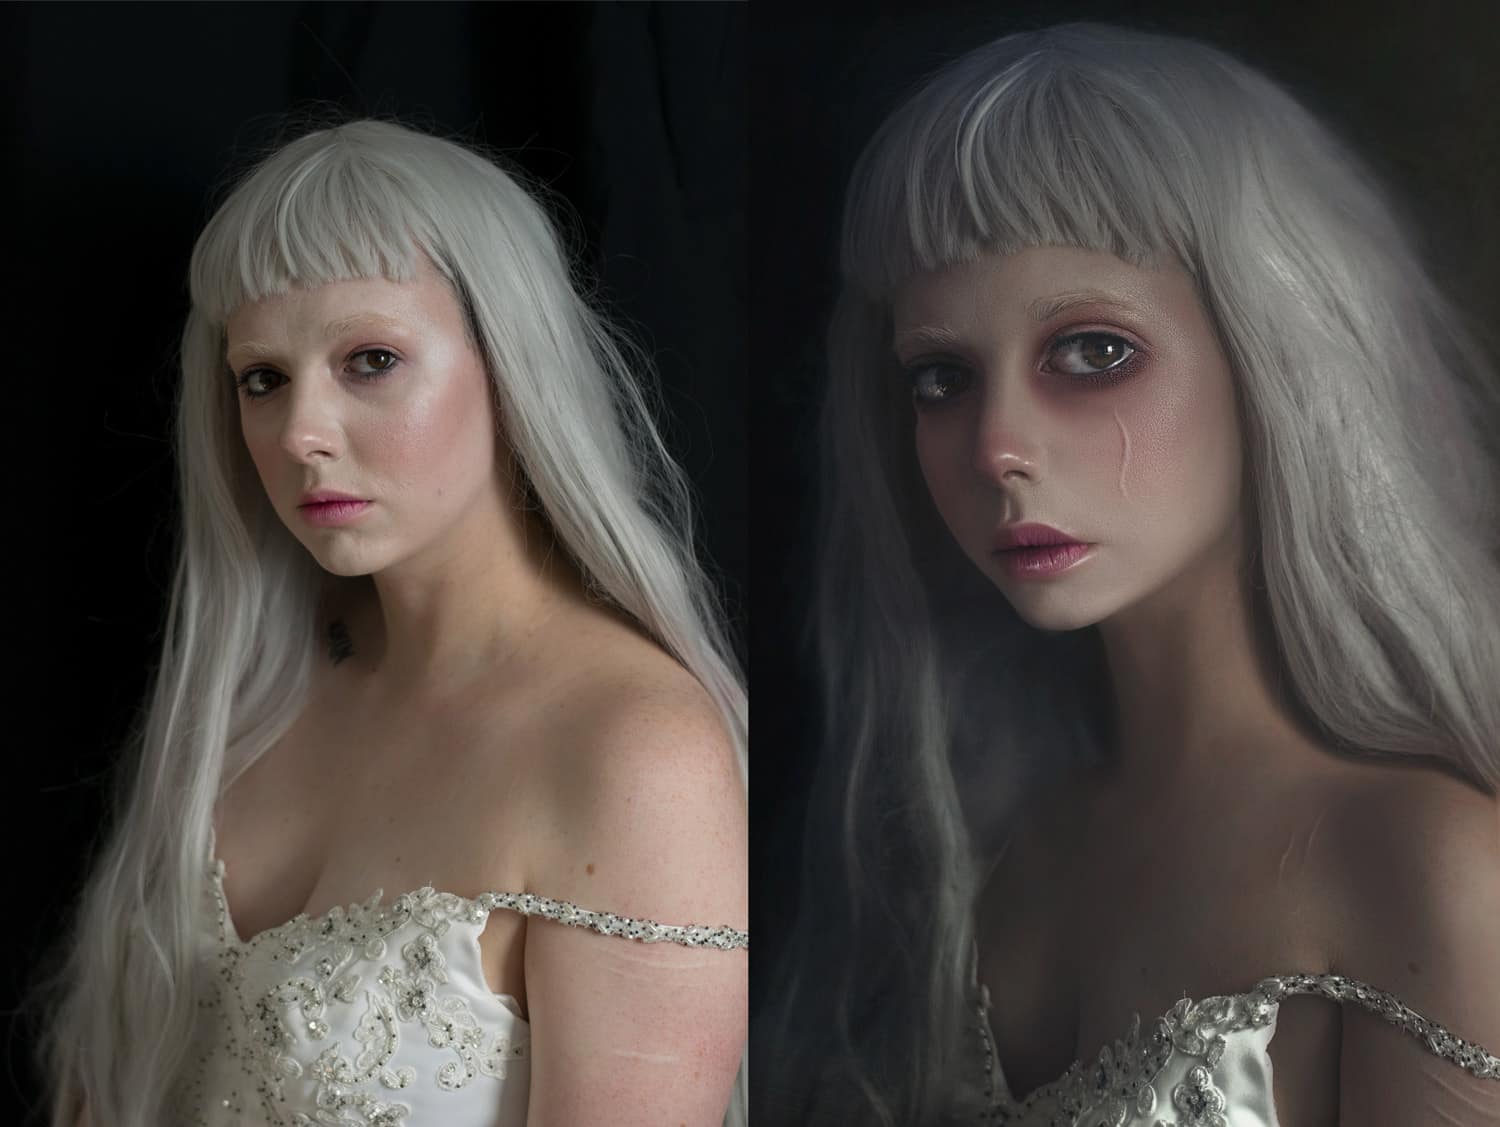 Surreal portraiture PRO EDU kelly robitaille instructor retoucher tutorials before after waif